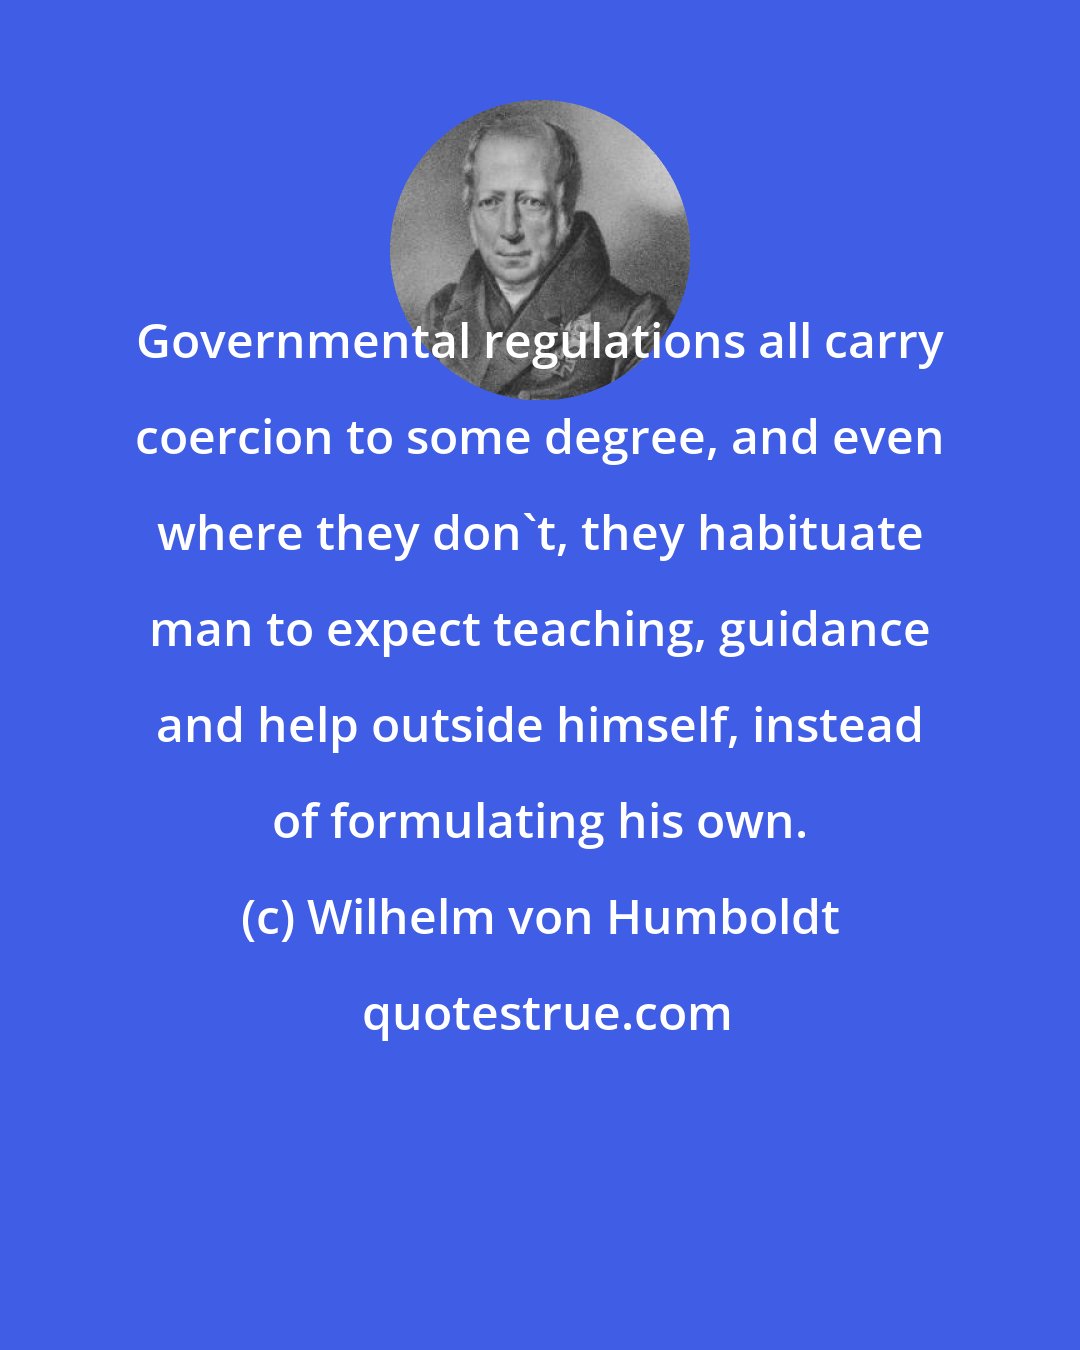 Wilhelm von Humboldt: Governmental regulations all carry coercion to some degree, and even where they don't, they habituate man to expect teaching, guidance and help outside himself, instead of formulating his own.